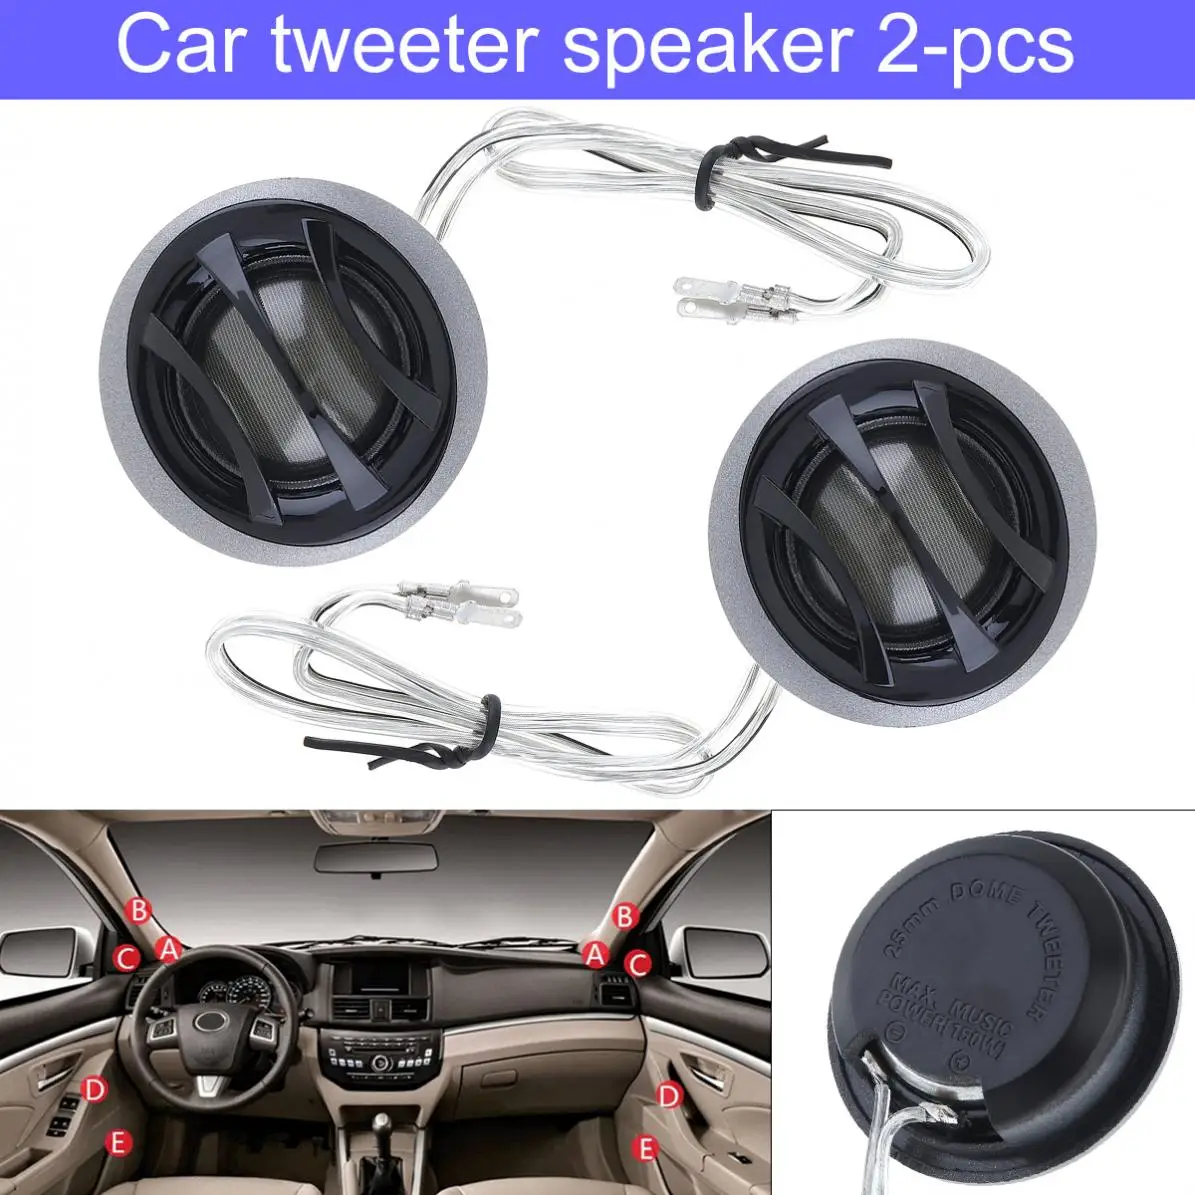 

2pcs 150W YH-520 25mm 12V 80Hz - 20KHz High Efficiency Dome Tweeter Speakers Built-in crossover for Car Audio System